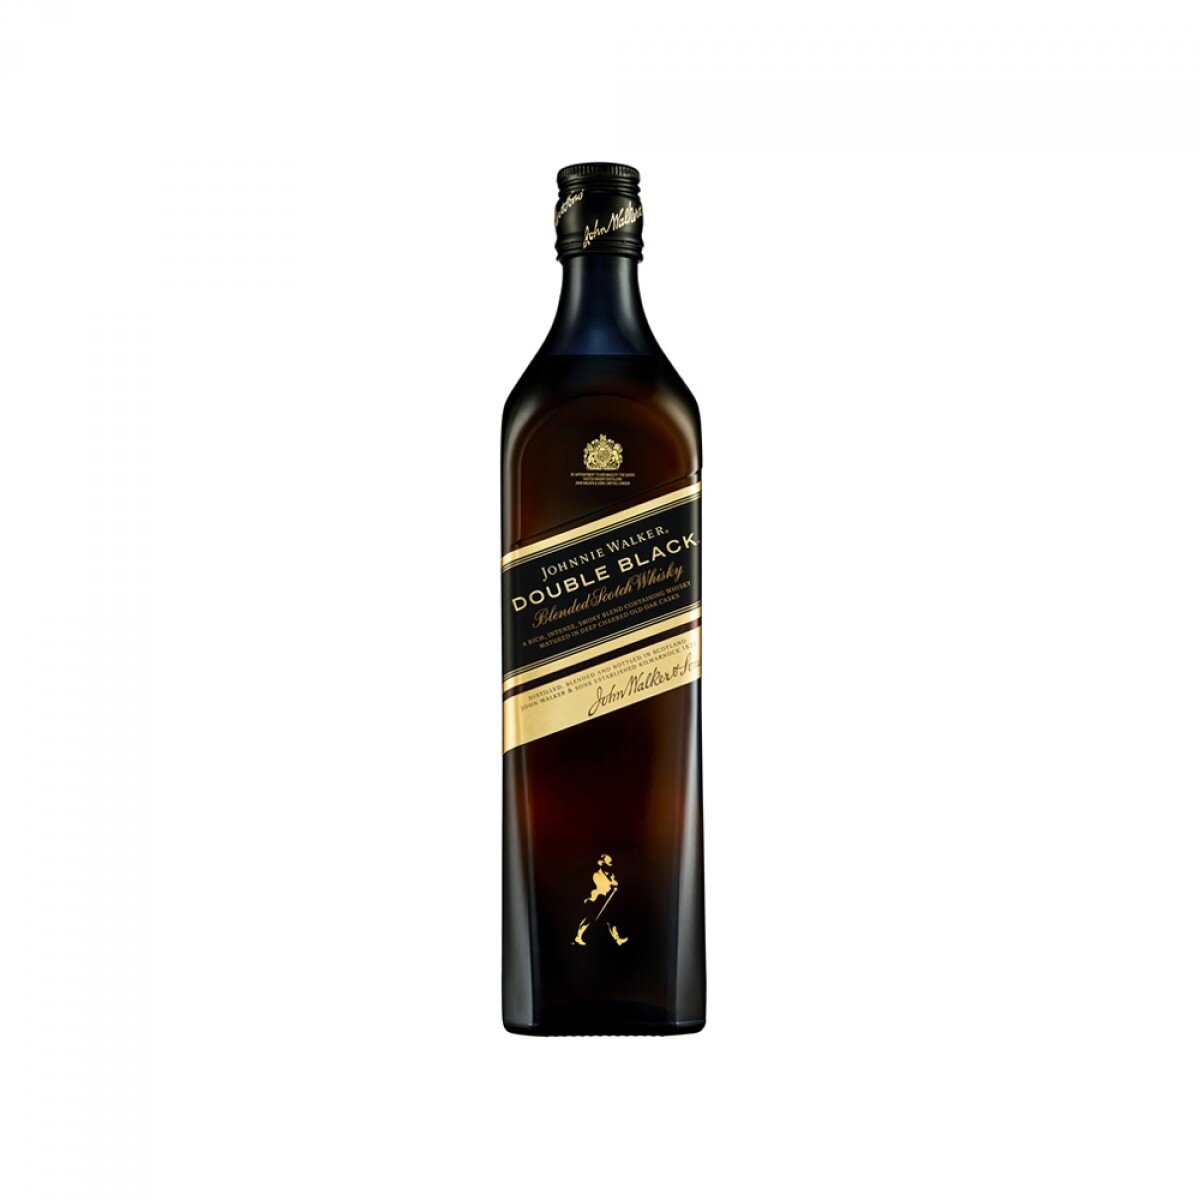 JOHNNIE WALKER RED LABEL PACK – 2 x 1L + 20CL - Go Duty Free Mauritius